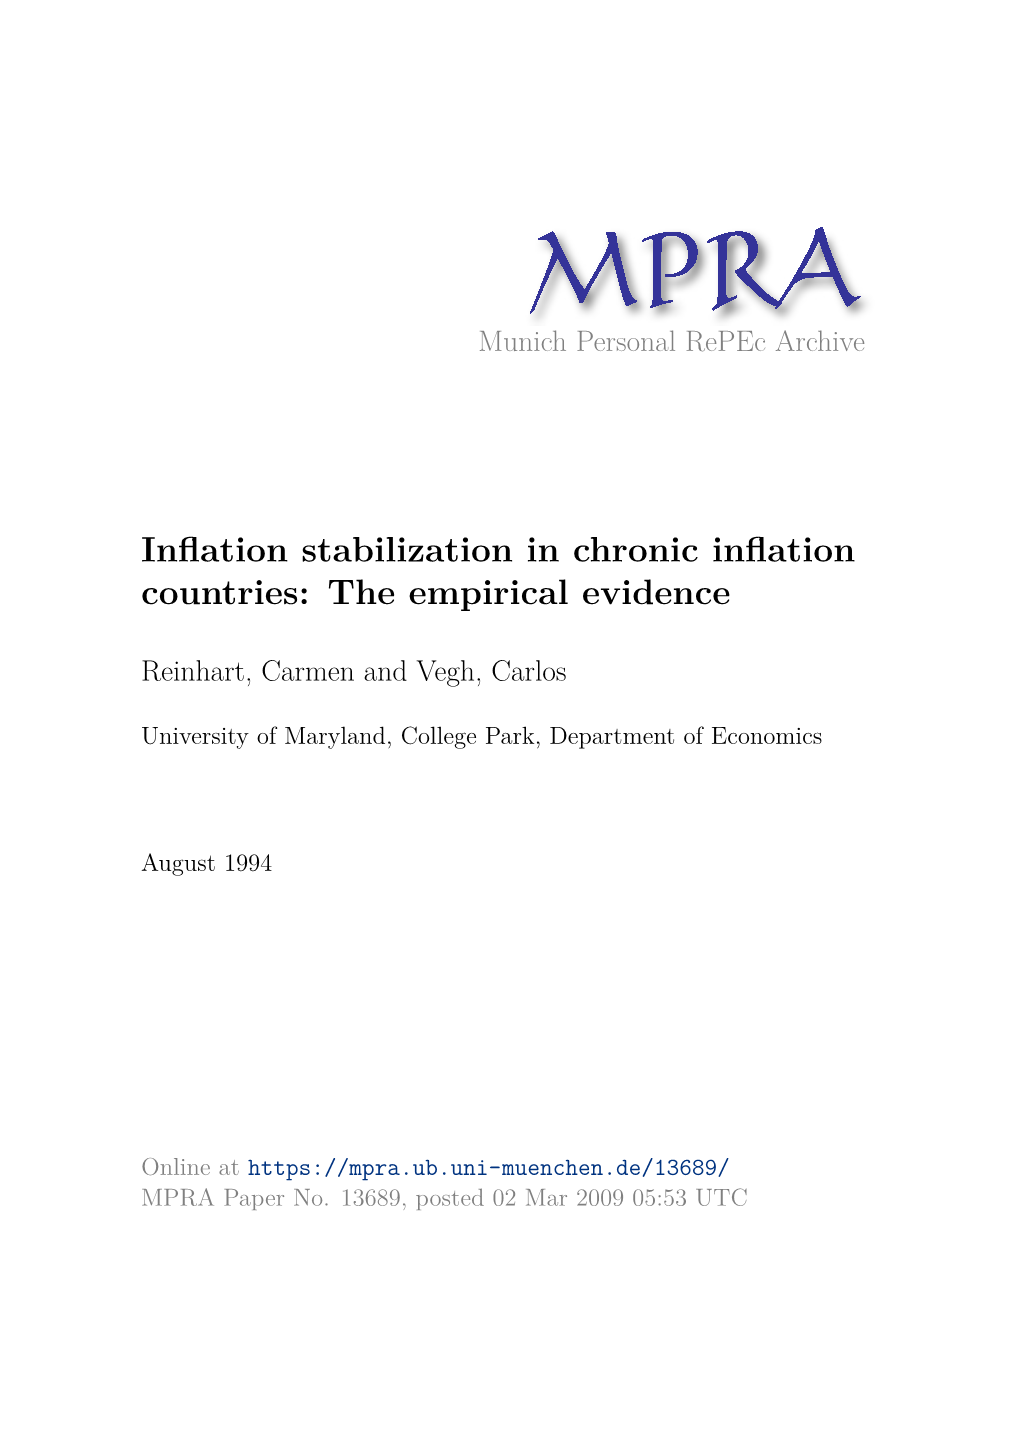 Inflation Stabilization in Chronic Inflation Countries: the Empirical